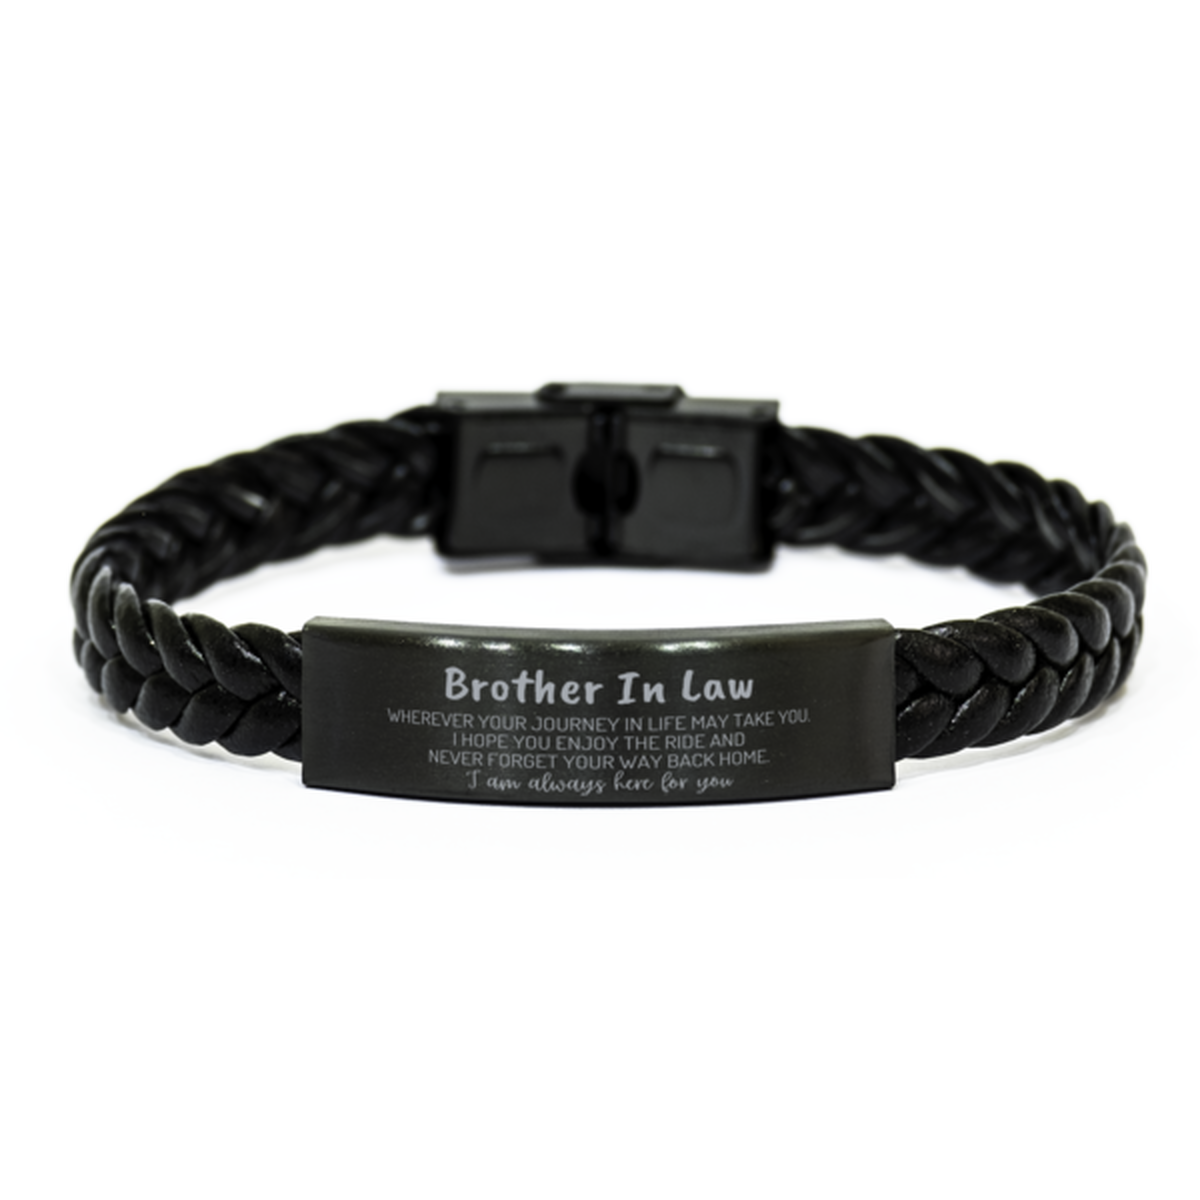 Brother In Law wherever your journey in life may take you, I am always here for you Brother In Law Braided Leather Bracelet, Awesome Christmas Gifts For Brother In Law, Brother In Law Birthday Gifts for Men Women Family Loved One